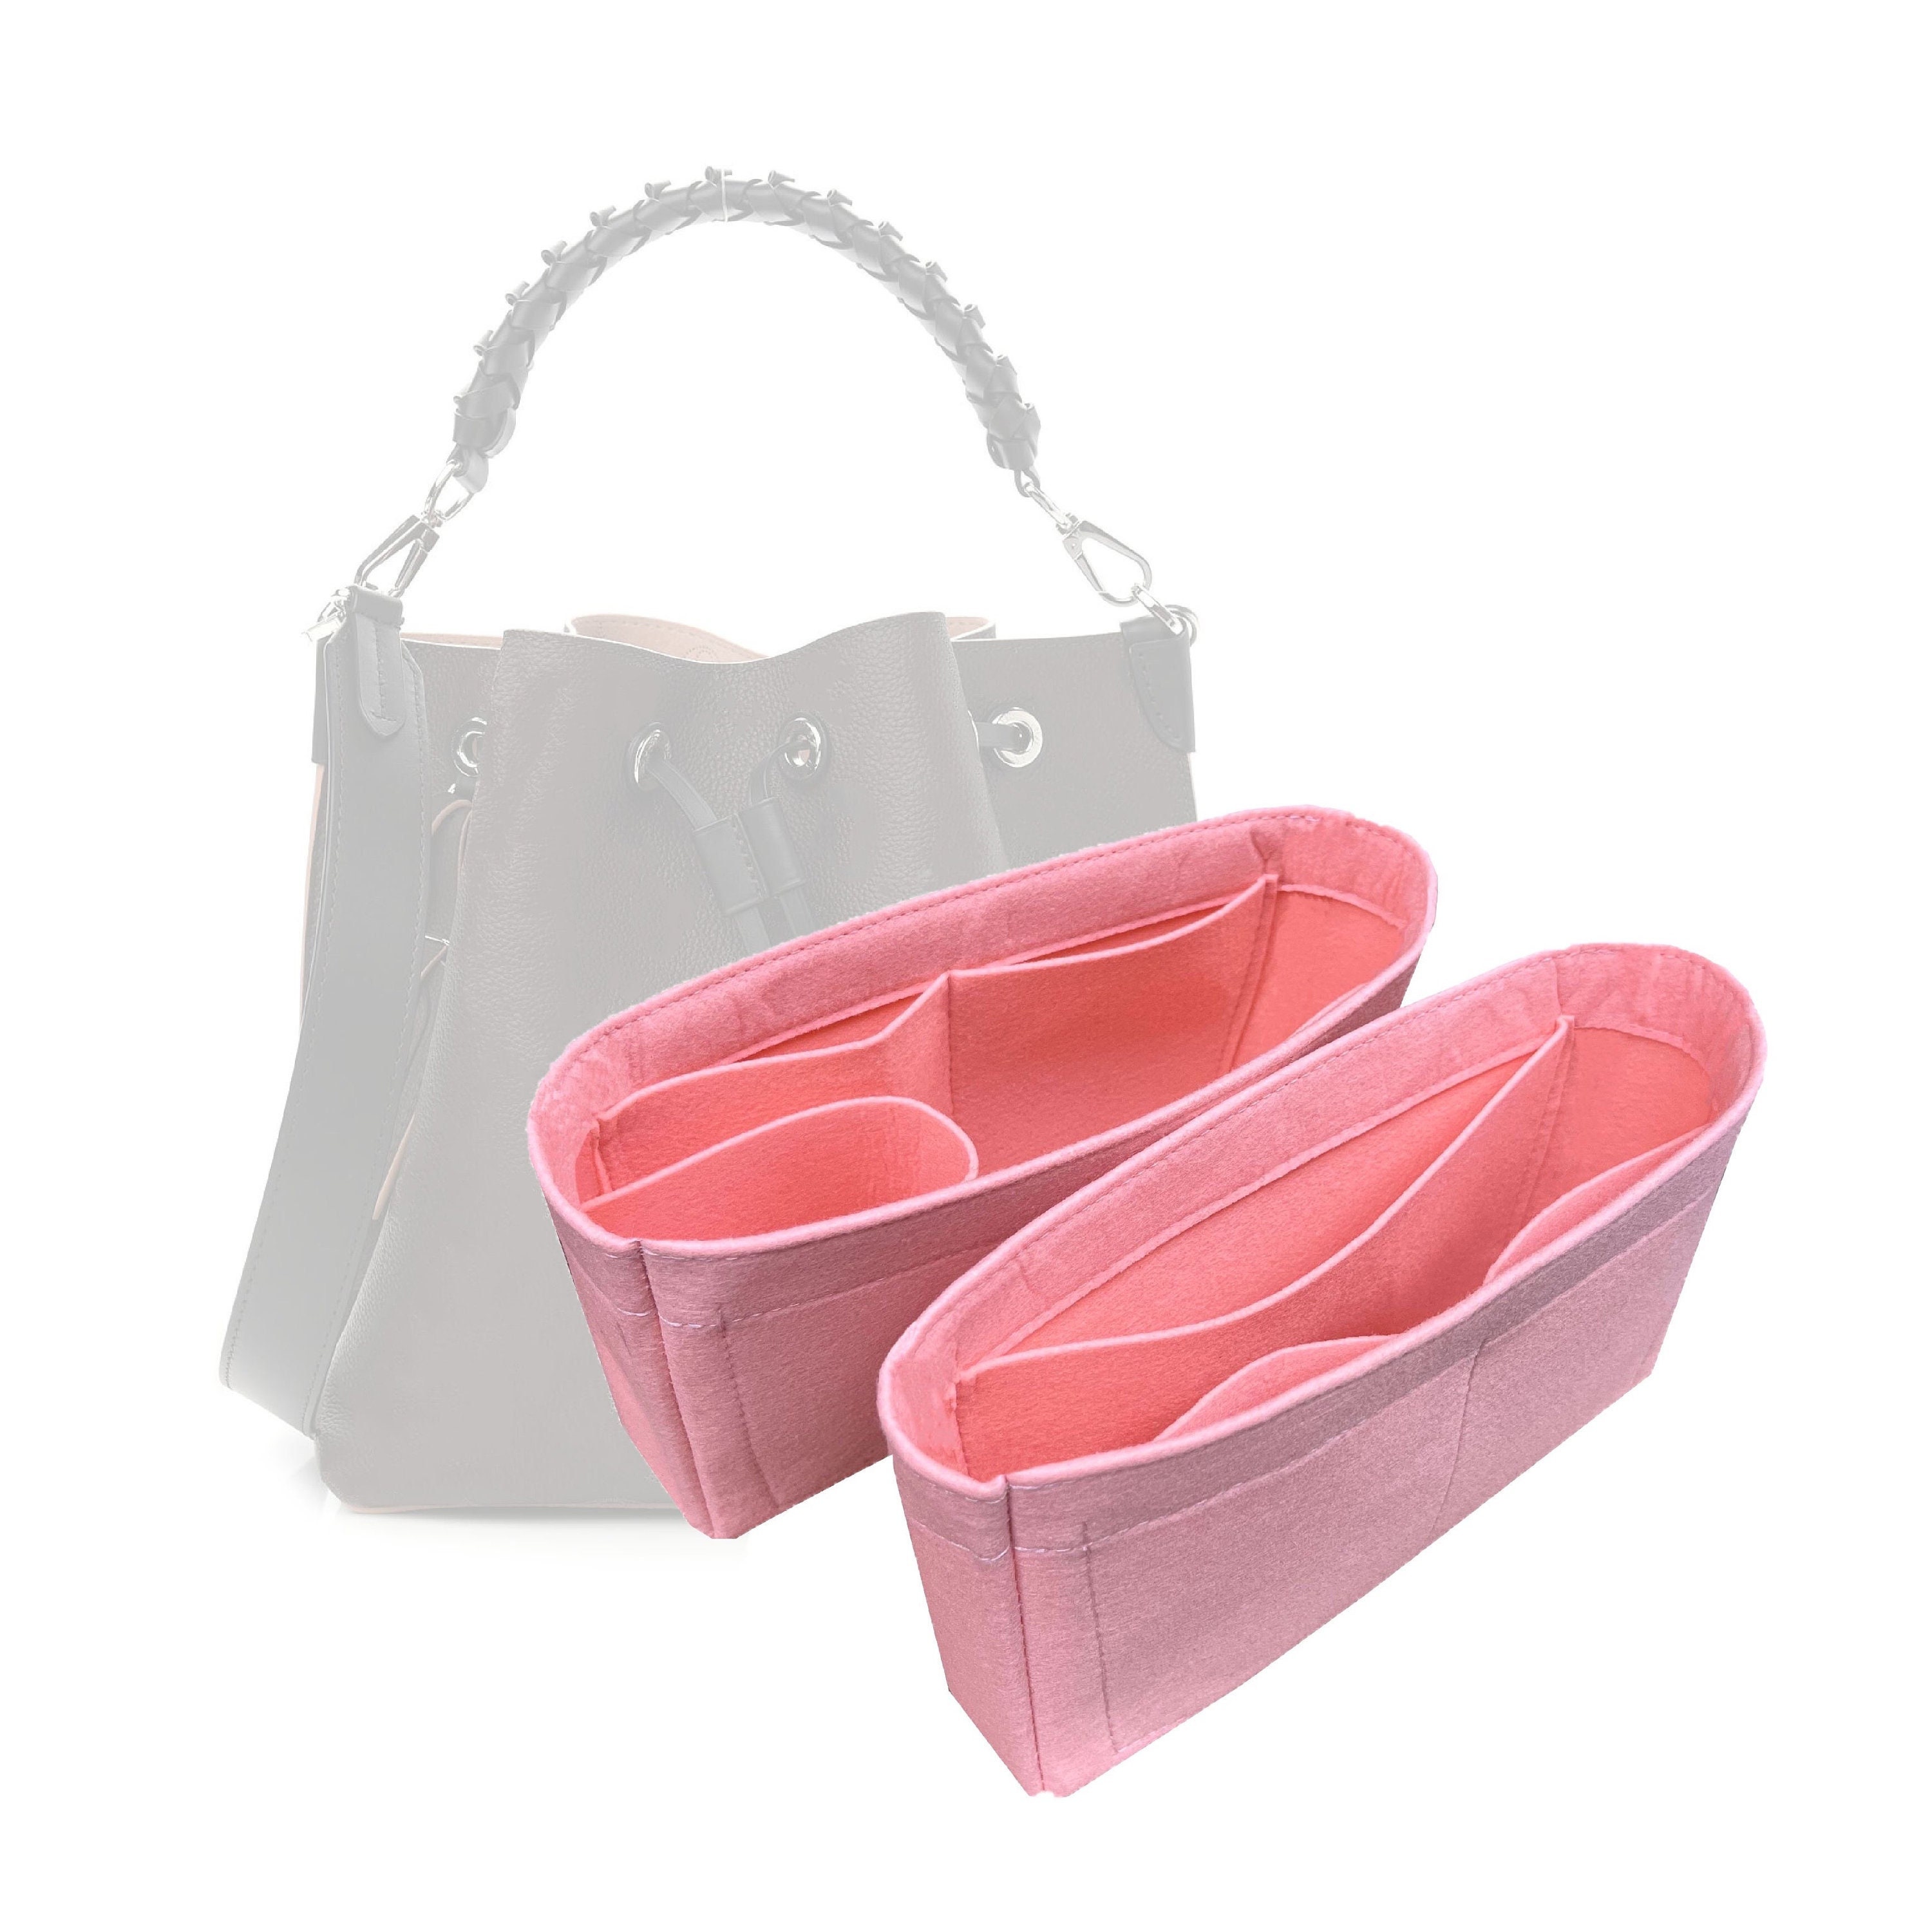 Customizable Felt Tote Bag Shaper and Liner Protector, Purse